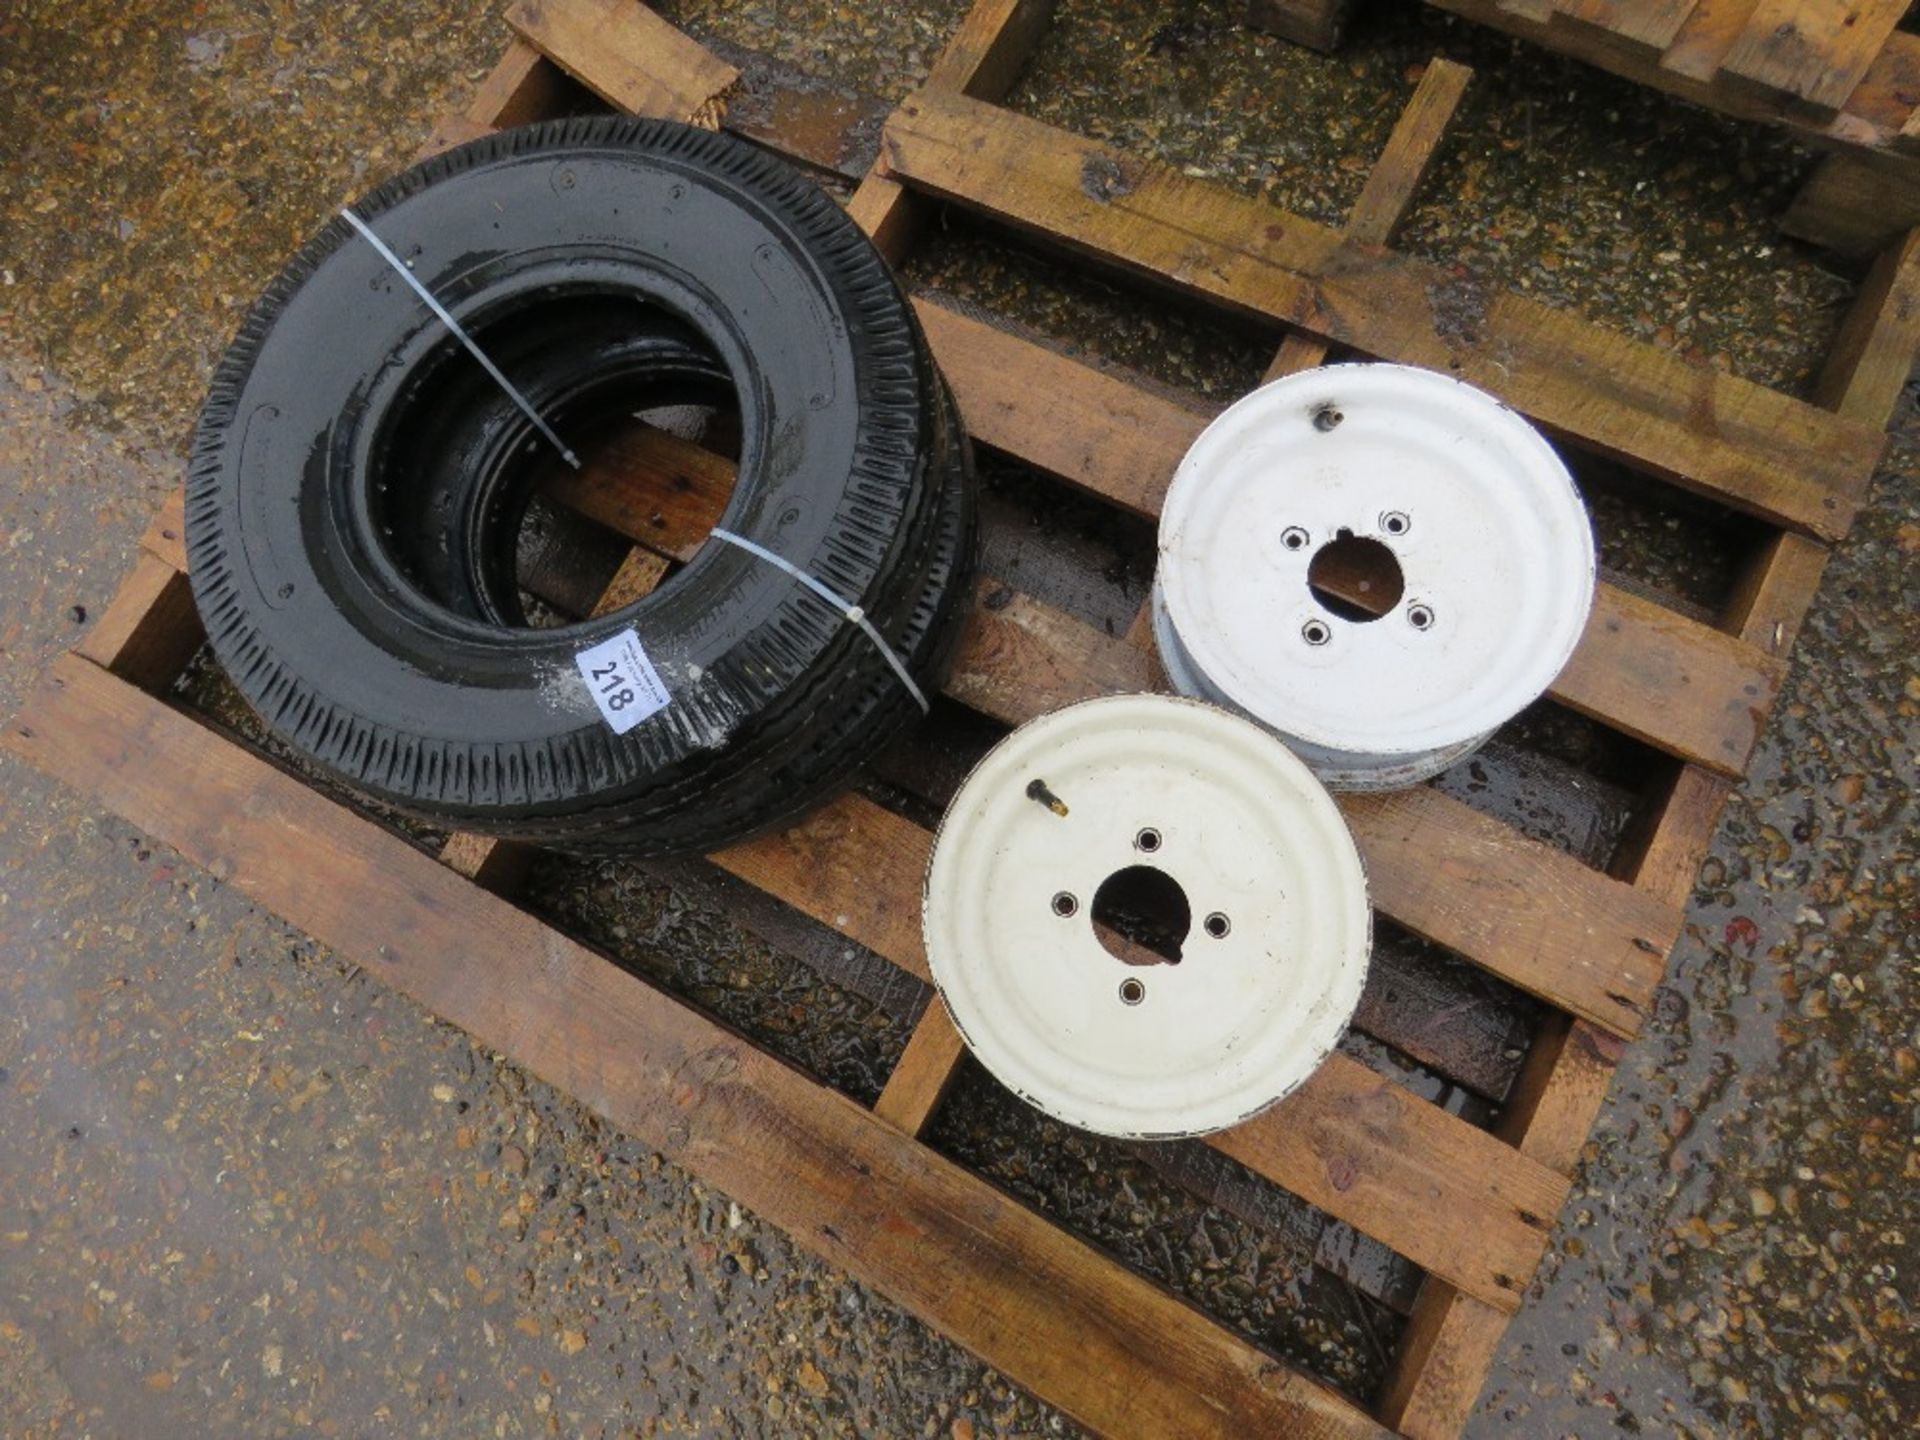 2 X 4 STUD TRAILER RIMS WITH TYRES, 5.00 X 10. - Image 4 of 4